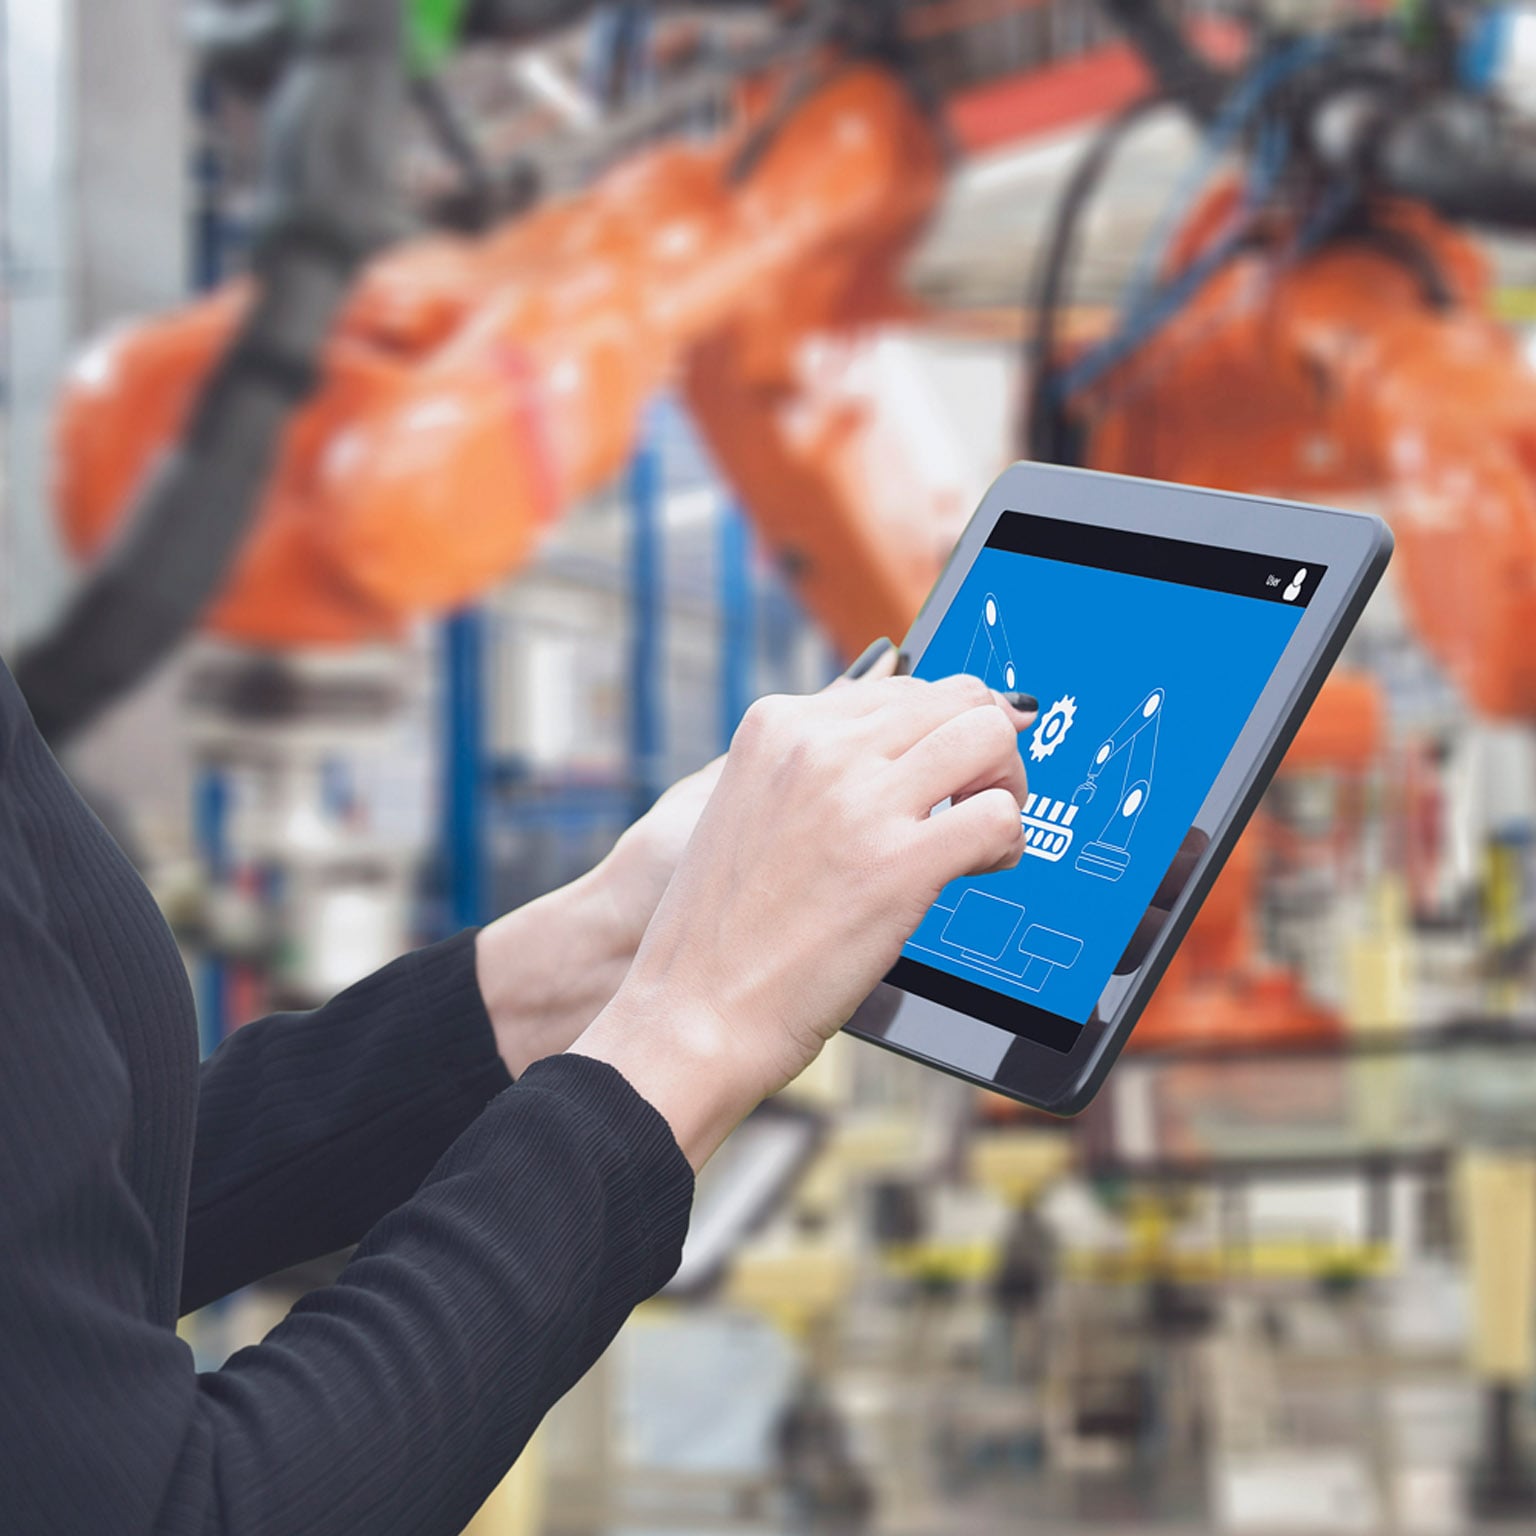 Close up view of a tablet with someone pointing to an image featuring advanced manufacturing technology.